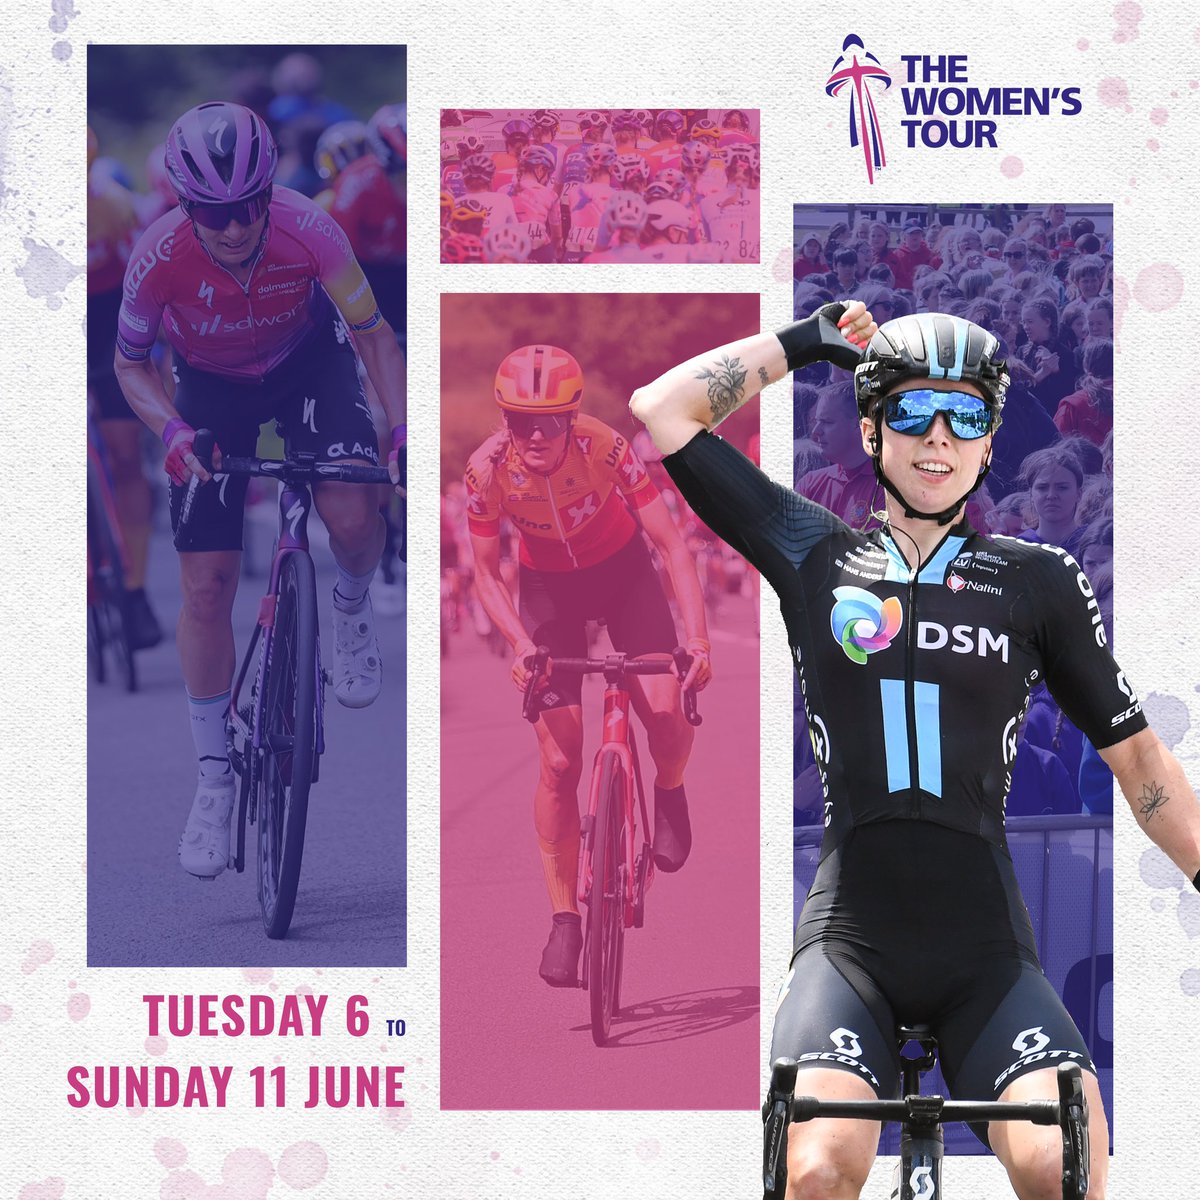 Save the dates: Tuesday 6 to Sunday 11 June 2023 🗓

#WomensTour #UCIWWT